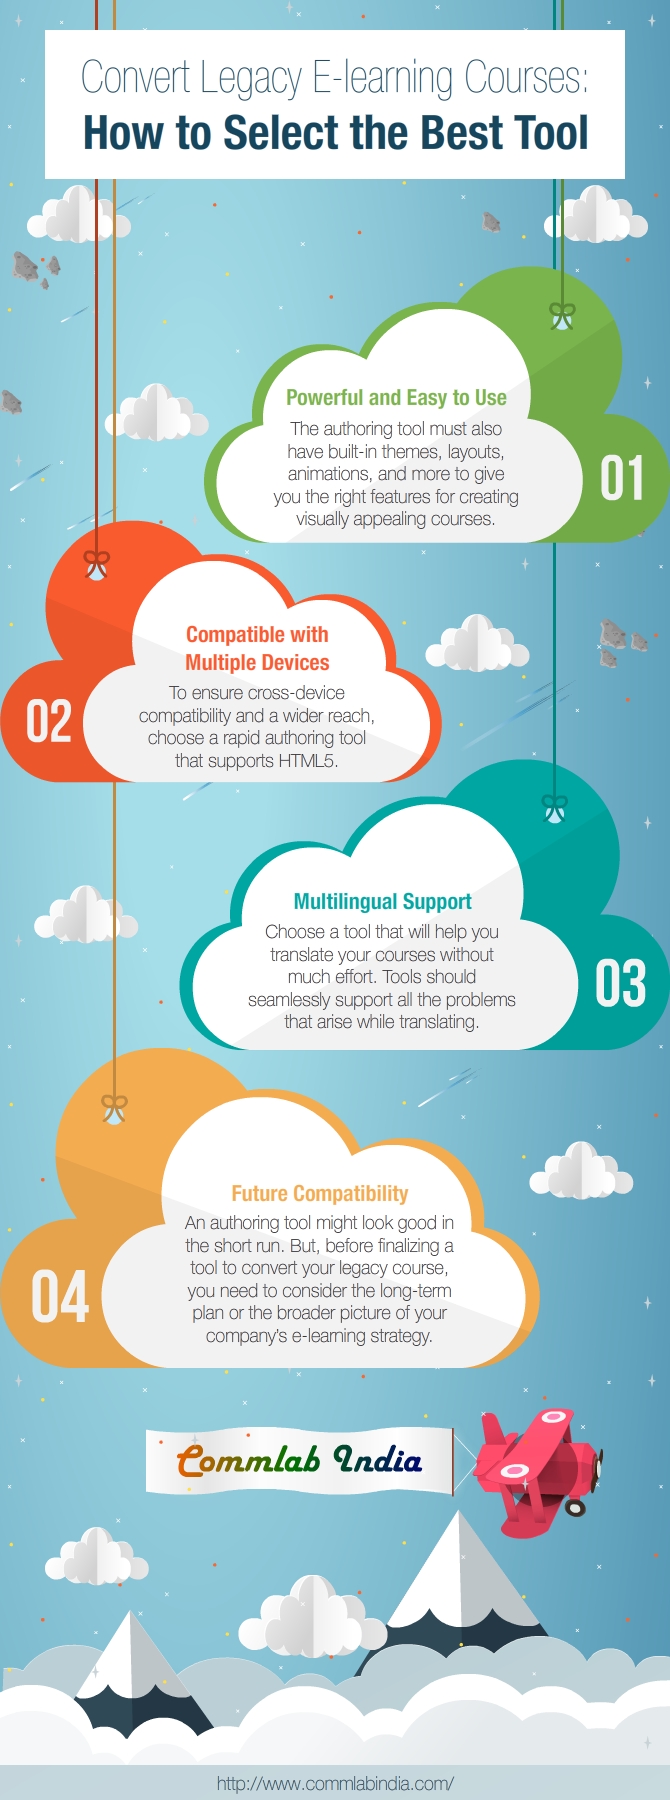 Convert Legacy E-learning Courses: How to Select the Best Tool [Infographic]